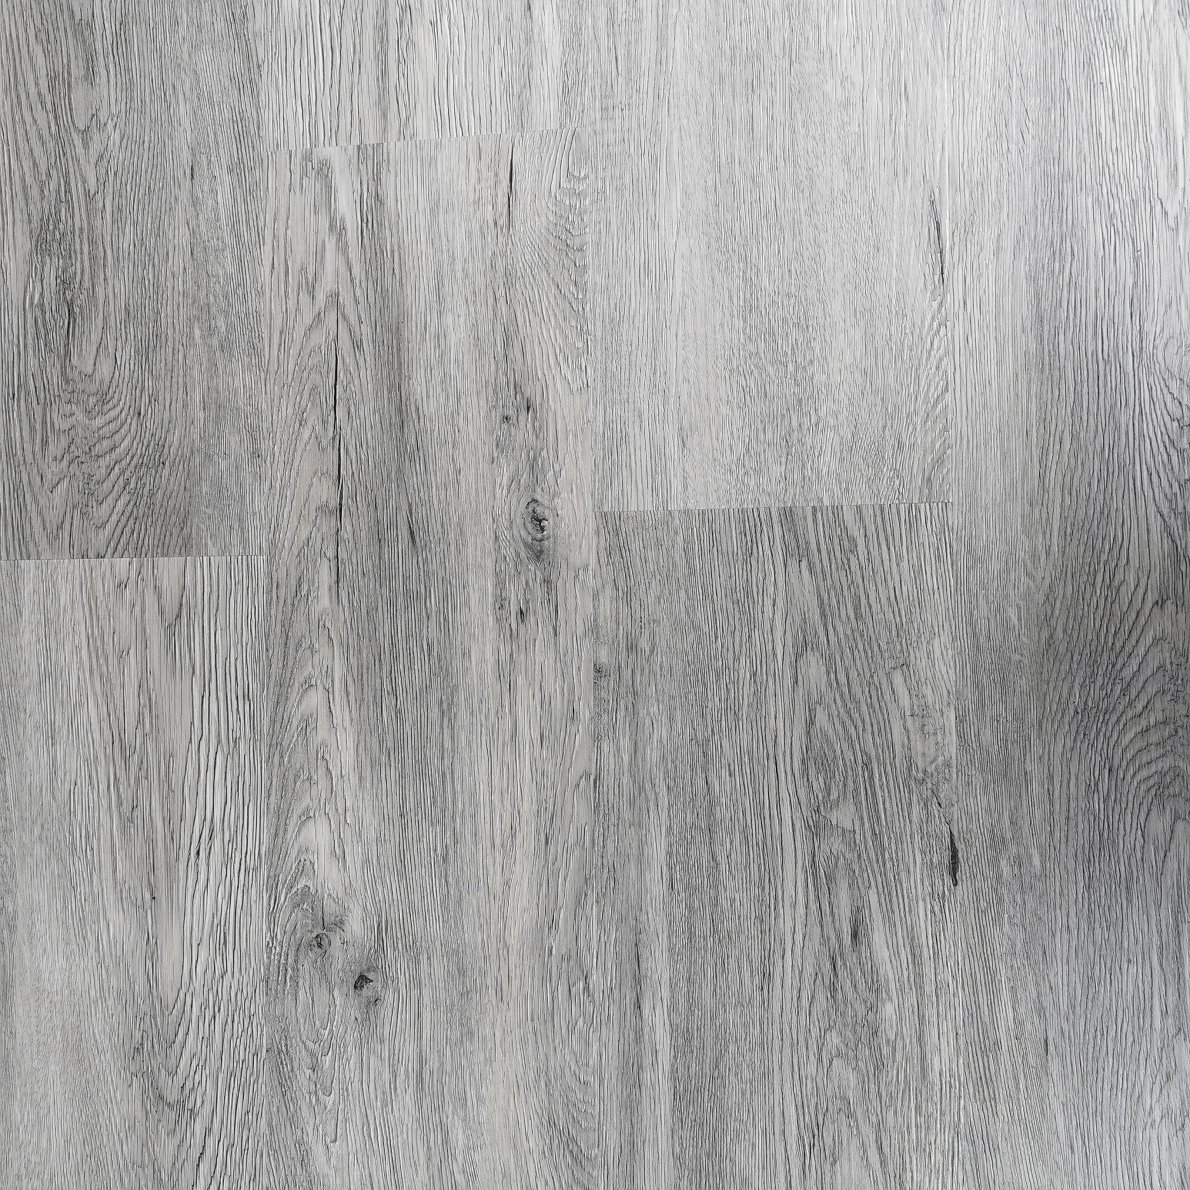 Hot Sale for 15mm T&G Floorboards -
 KANGTON click LVT flooring with free sample and factory price – Kangton